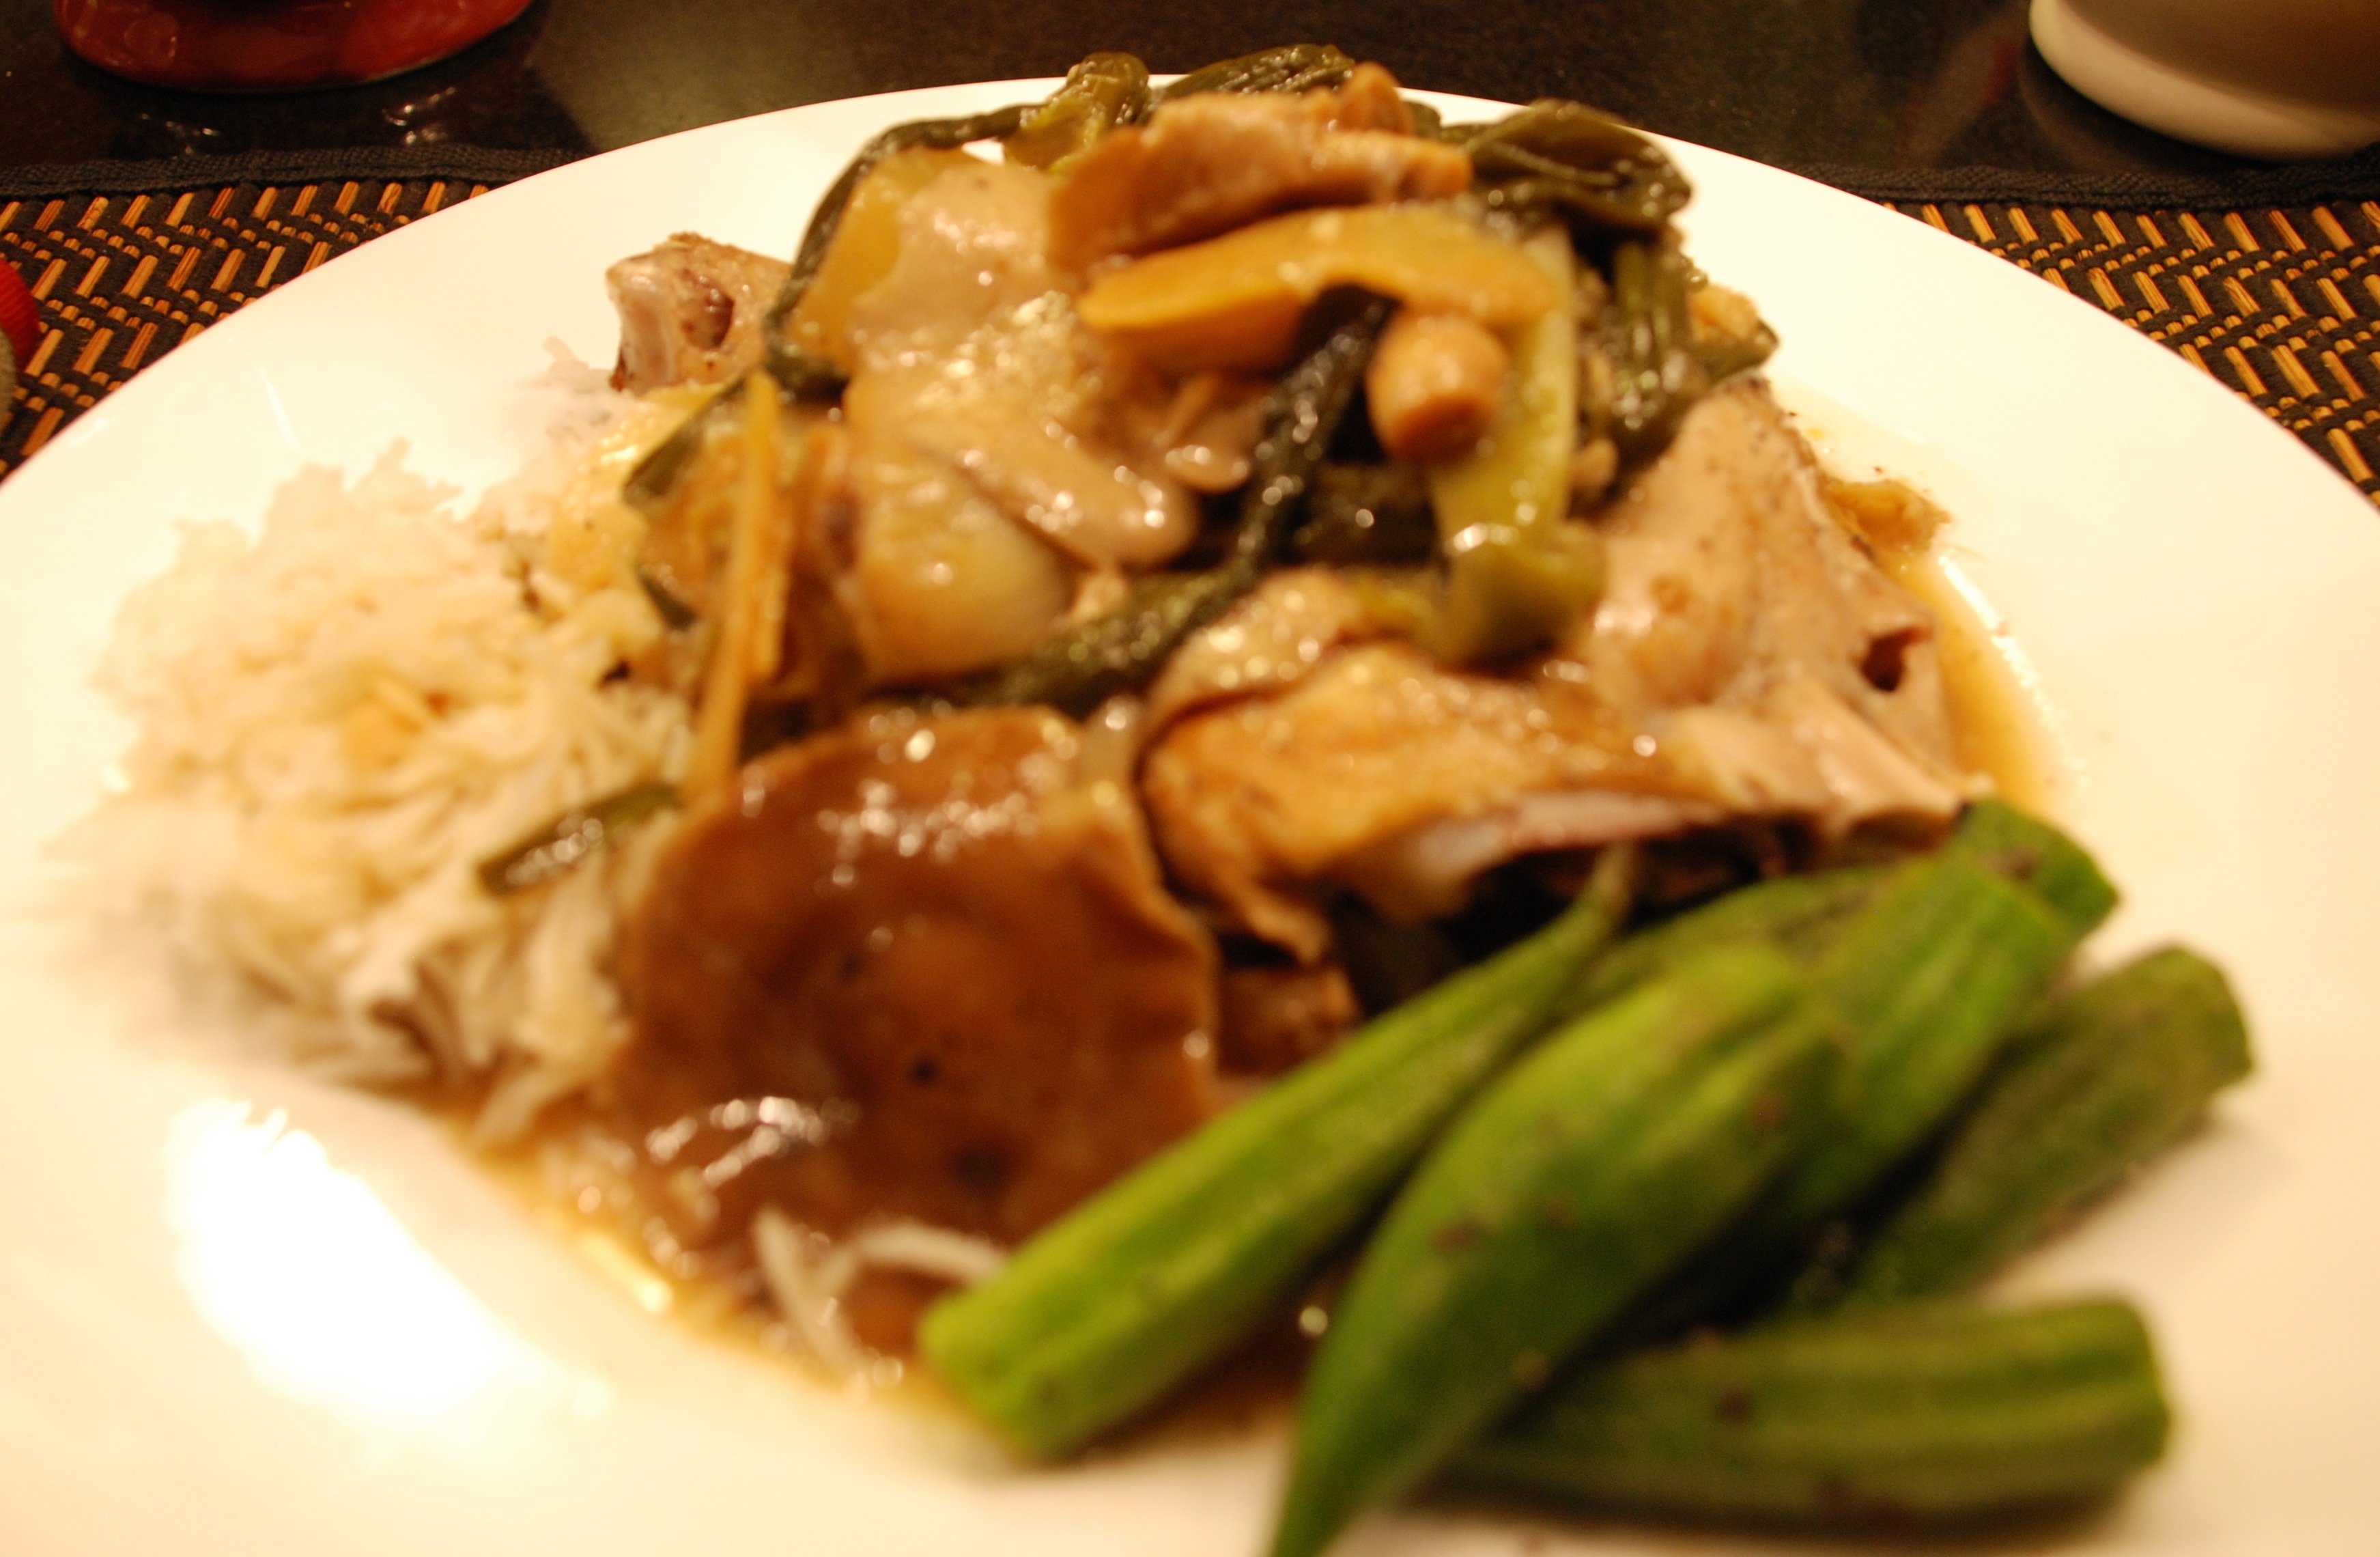 Sesame braised chicken with shiitake mushrooms and daikon on a white plate.